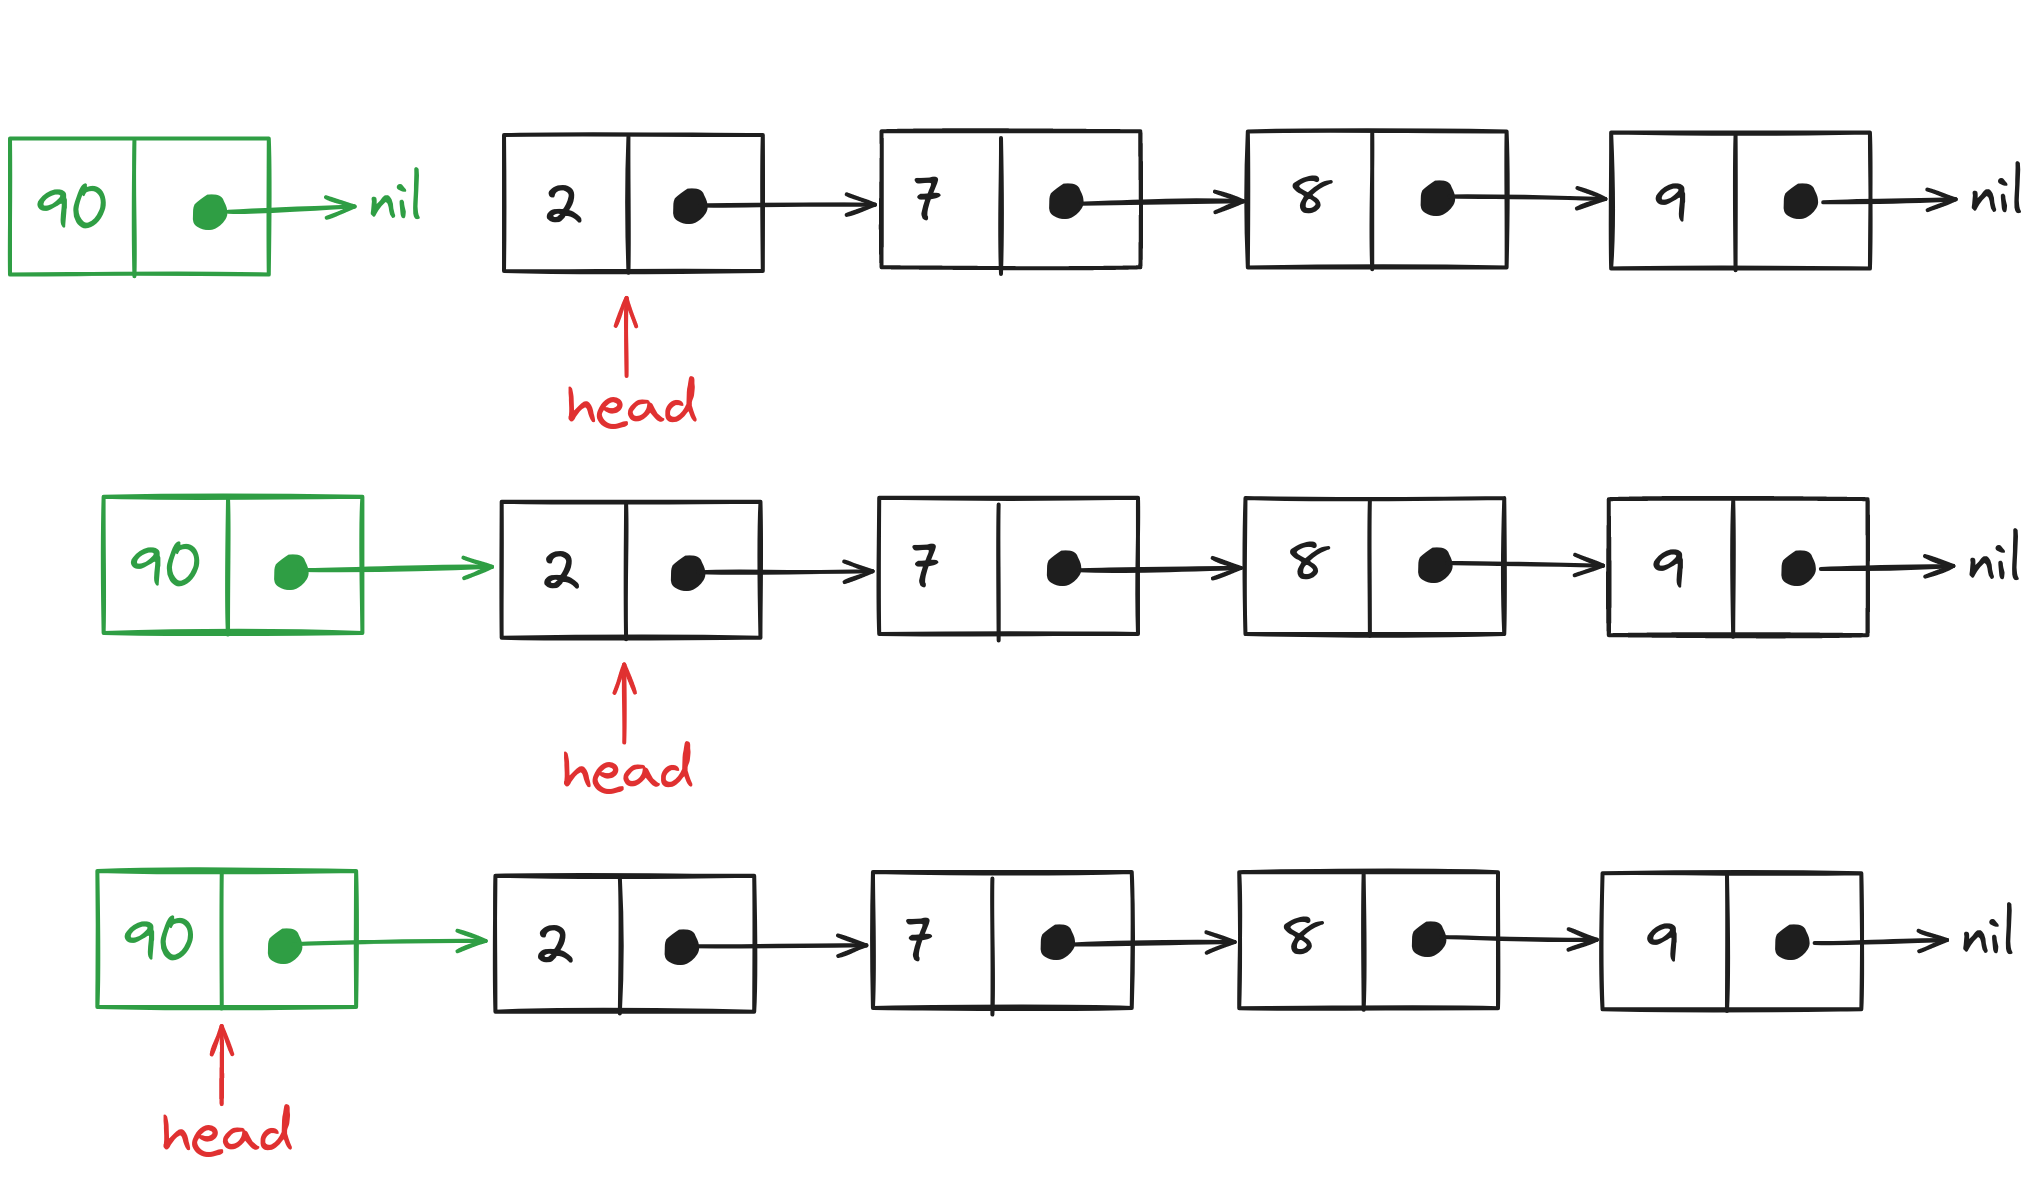 Inserting a value at the start of a Linked List